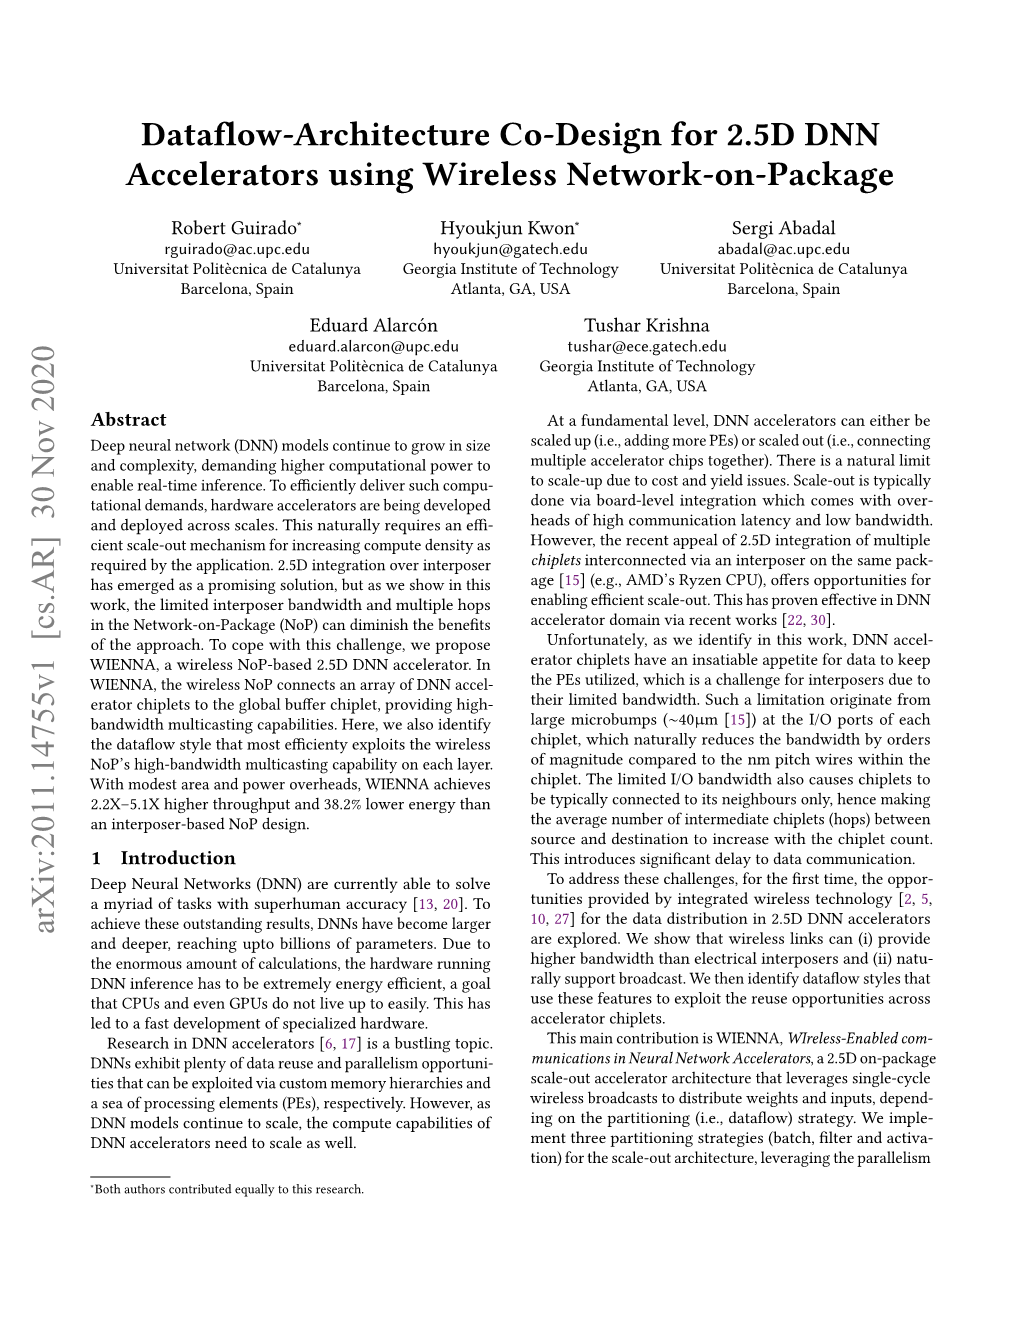 Dataflow-Architecture Co-Design for 2.5D DNN Accelerators Using Wireless Network-On-Package